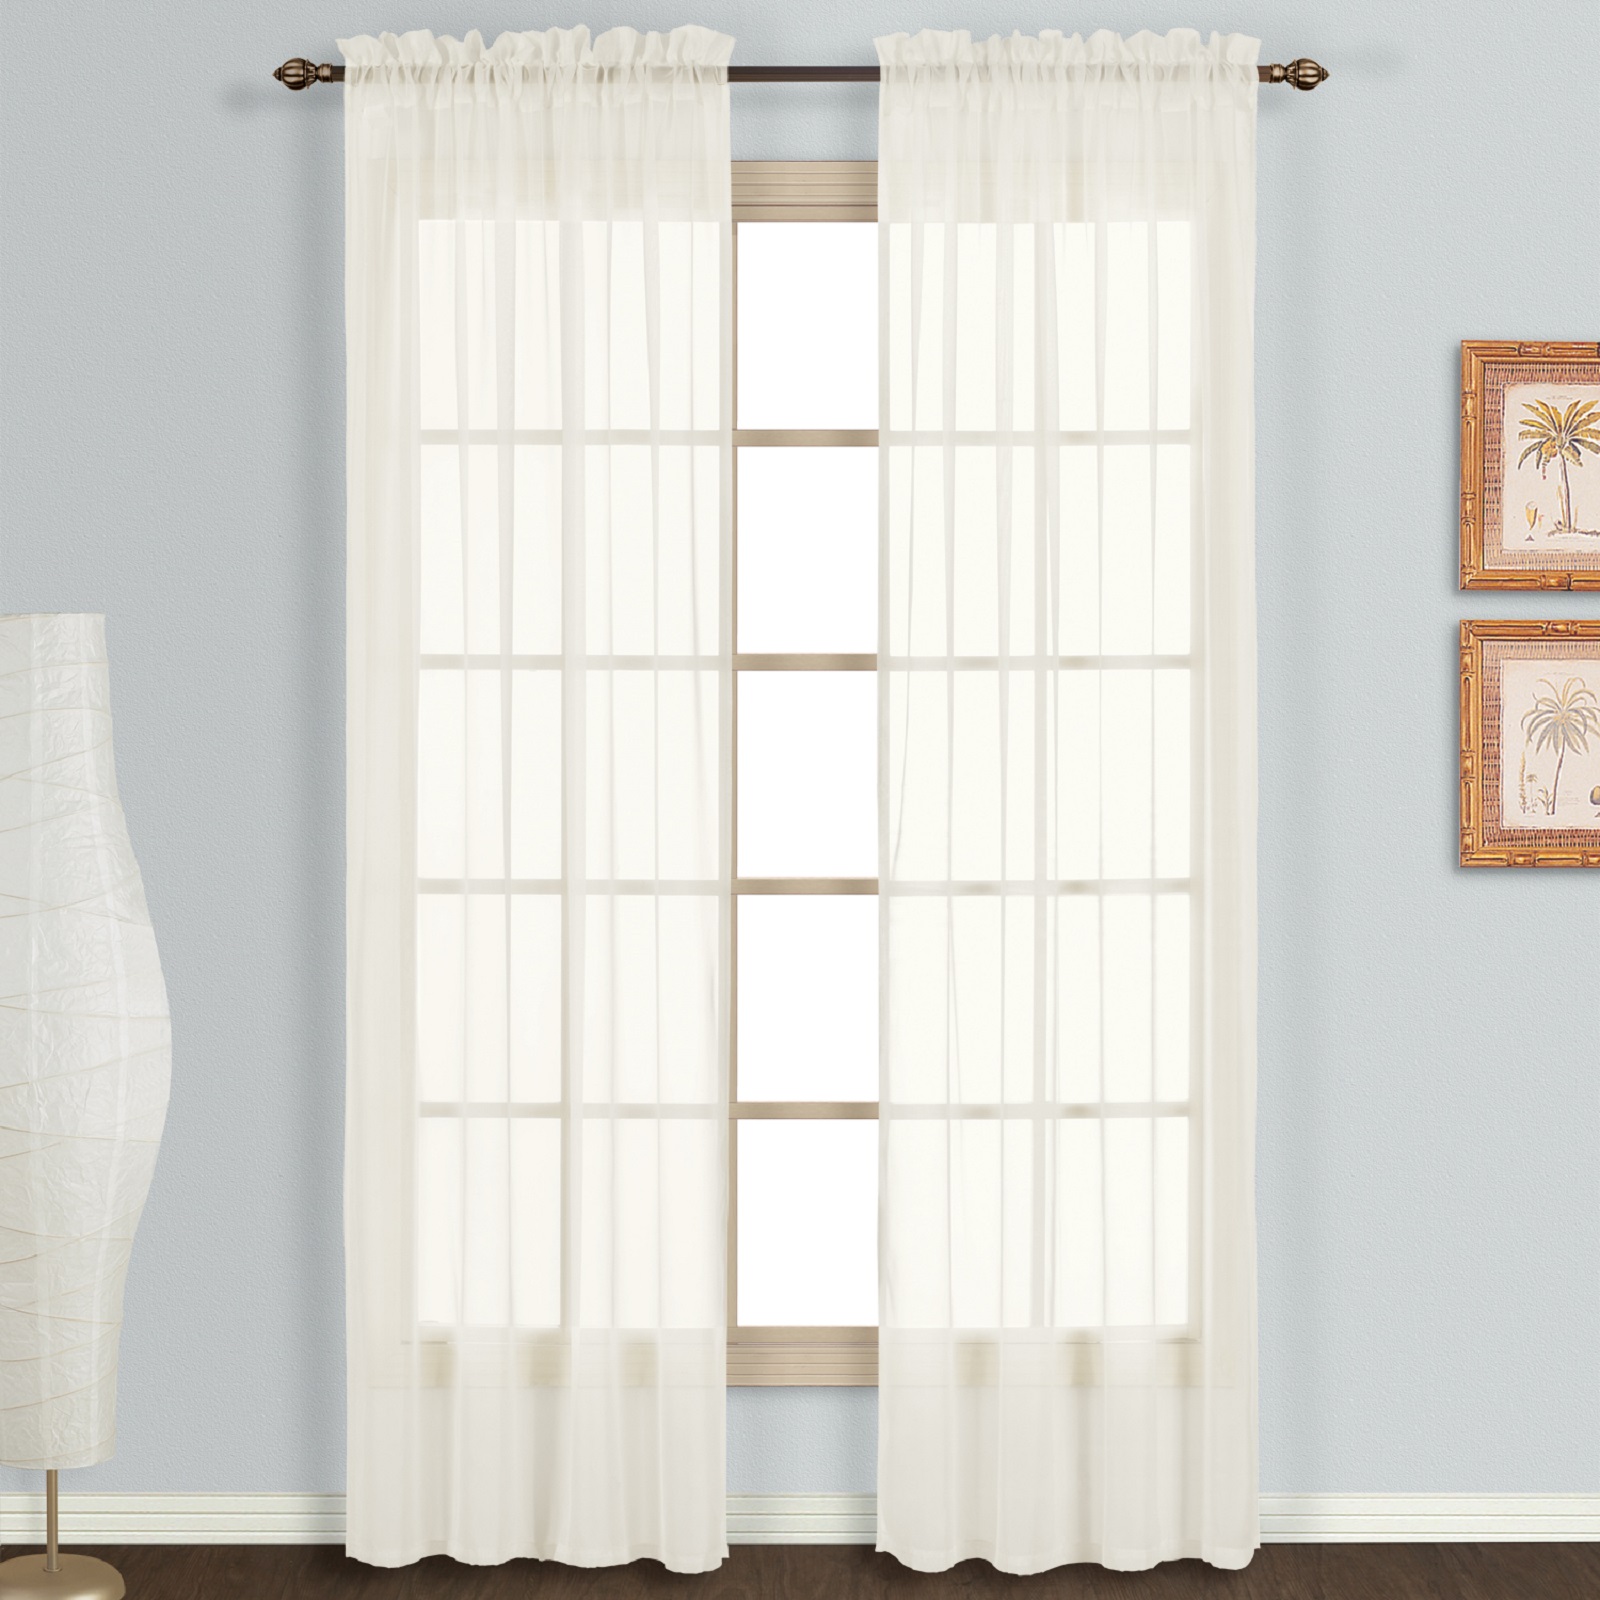 United Curtain Company Monte Carlo 118" x 120" voile window panel pair